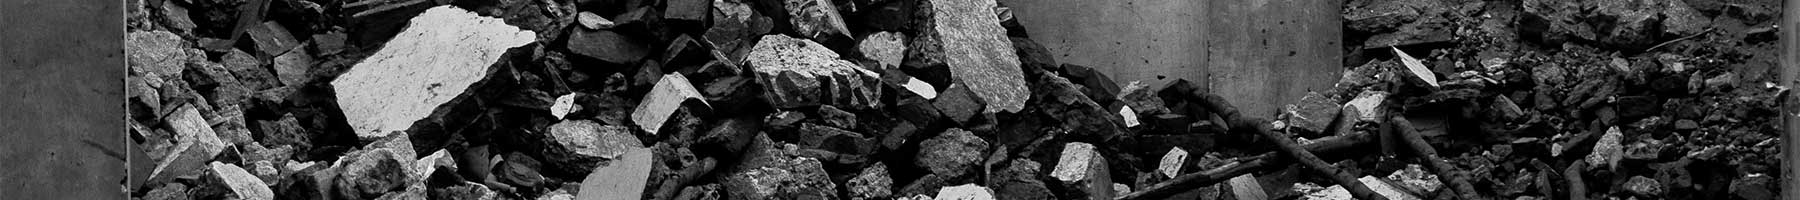 black and white photo of rubble